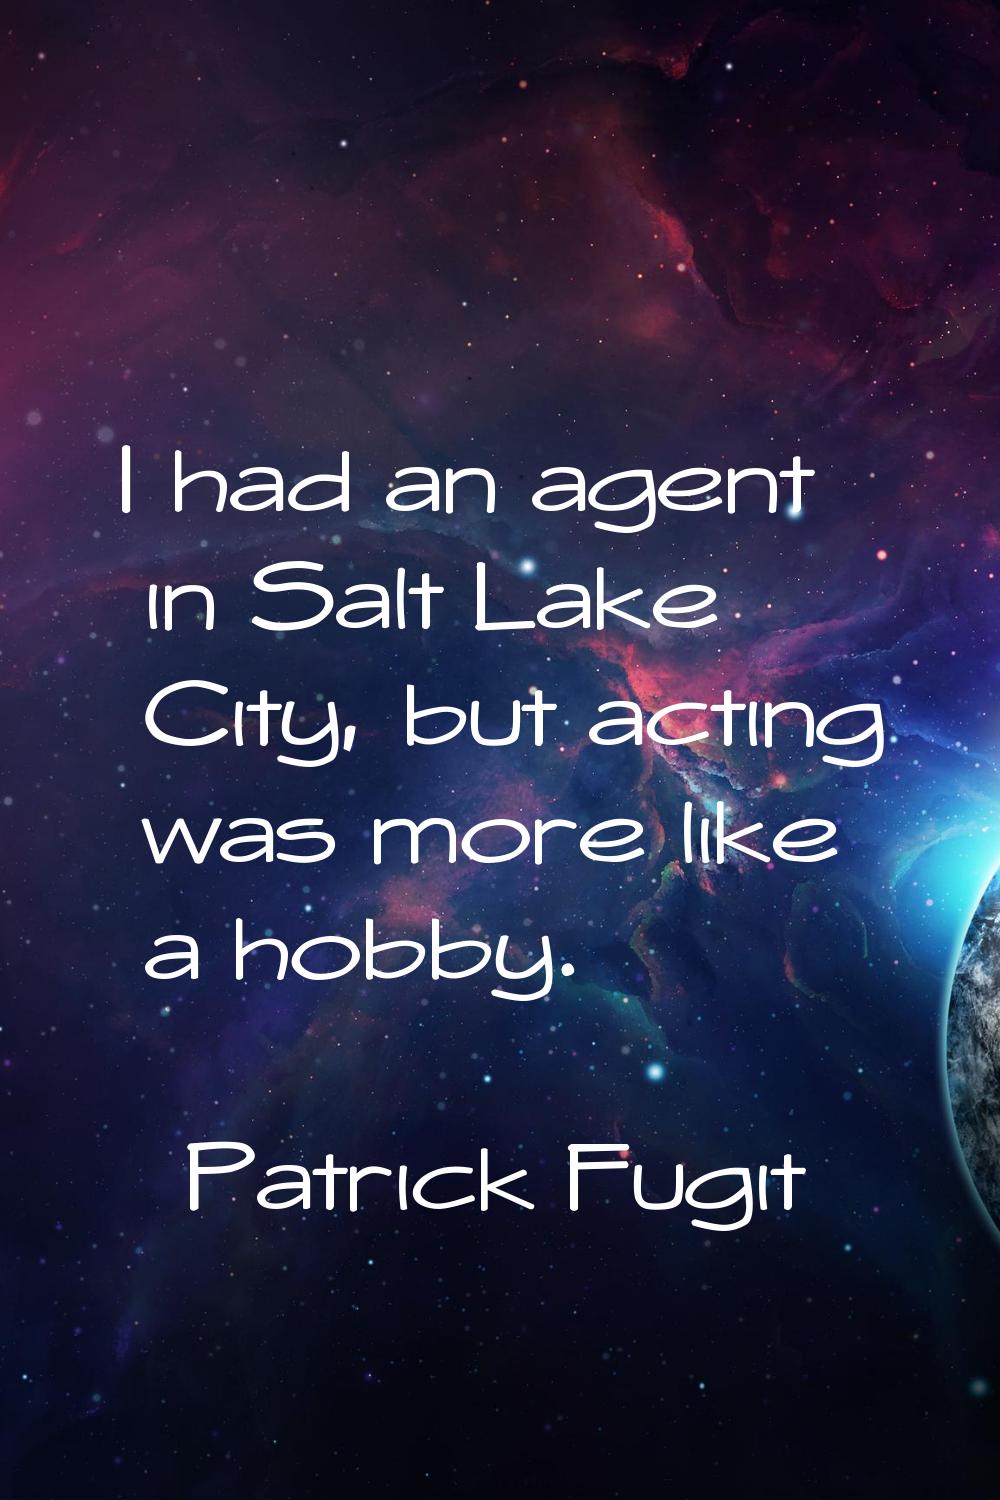 I had an agent in Salt Lake City, but acting was more like a hobby.